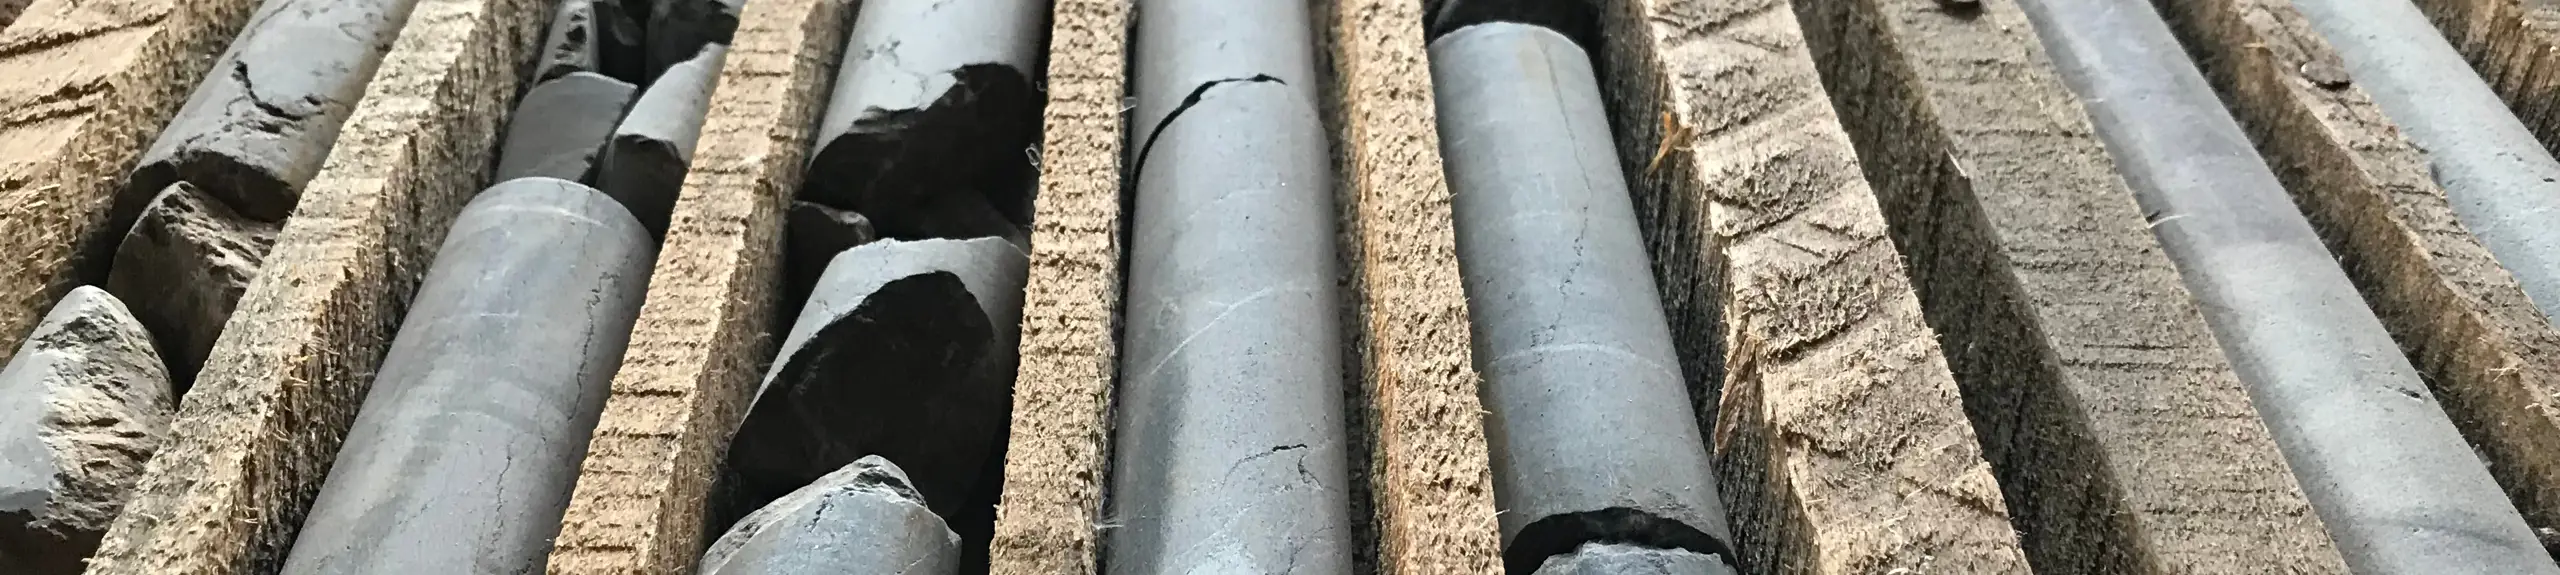 A collection of our stored concrete samples